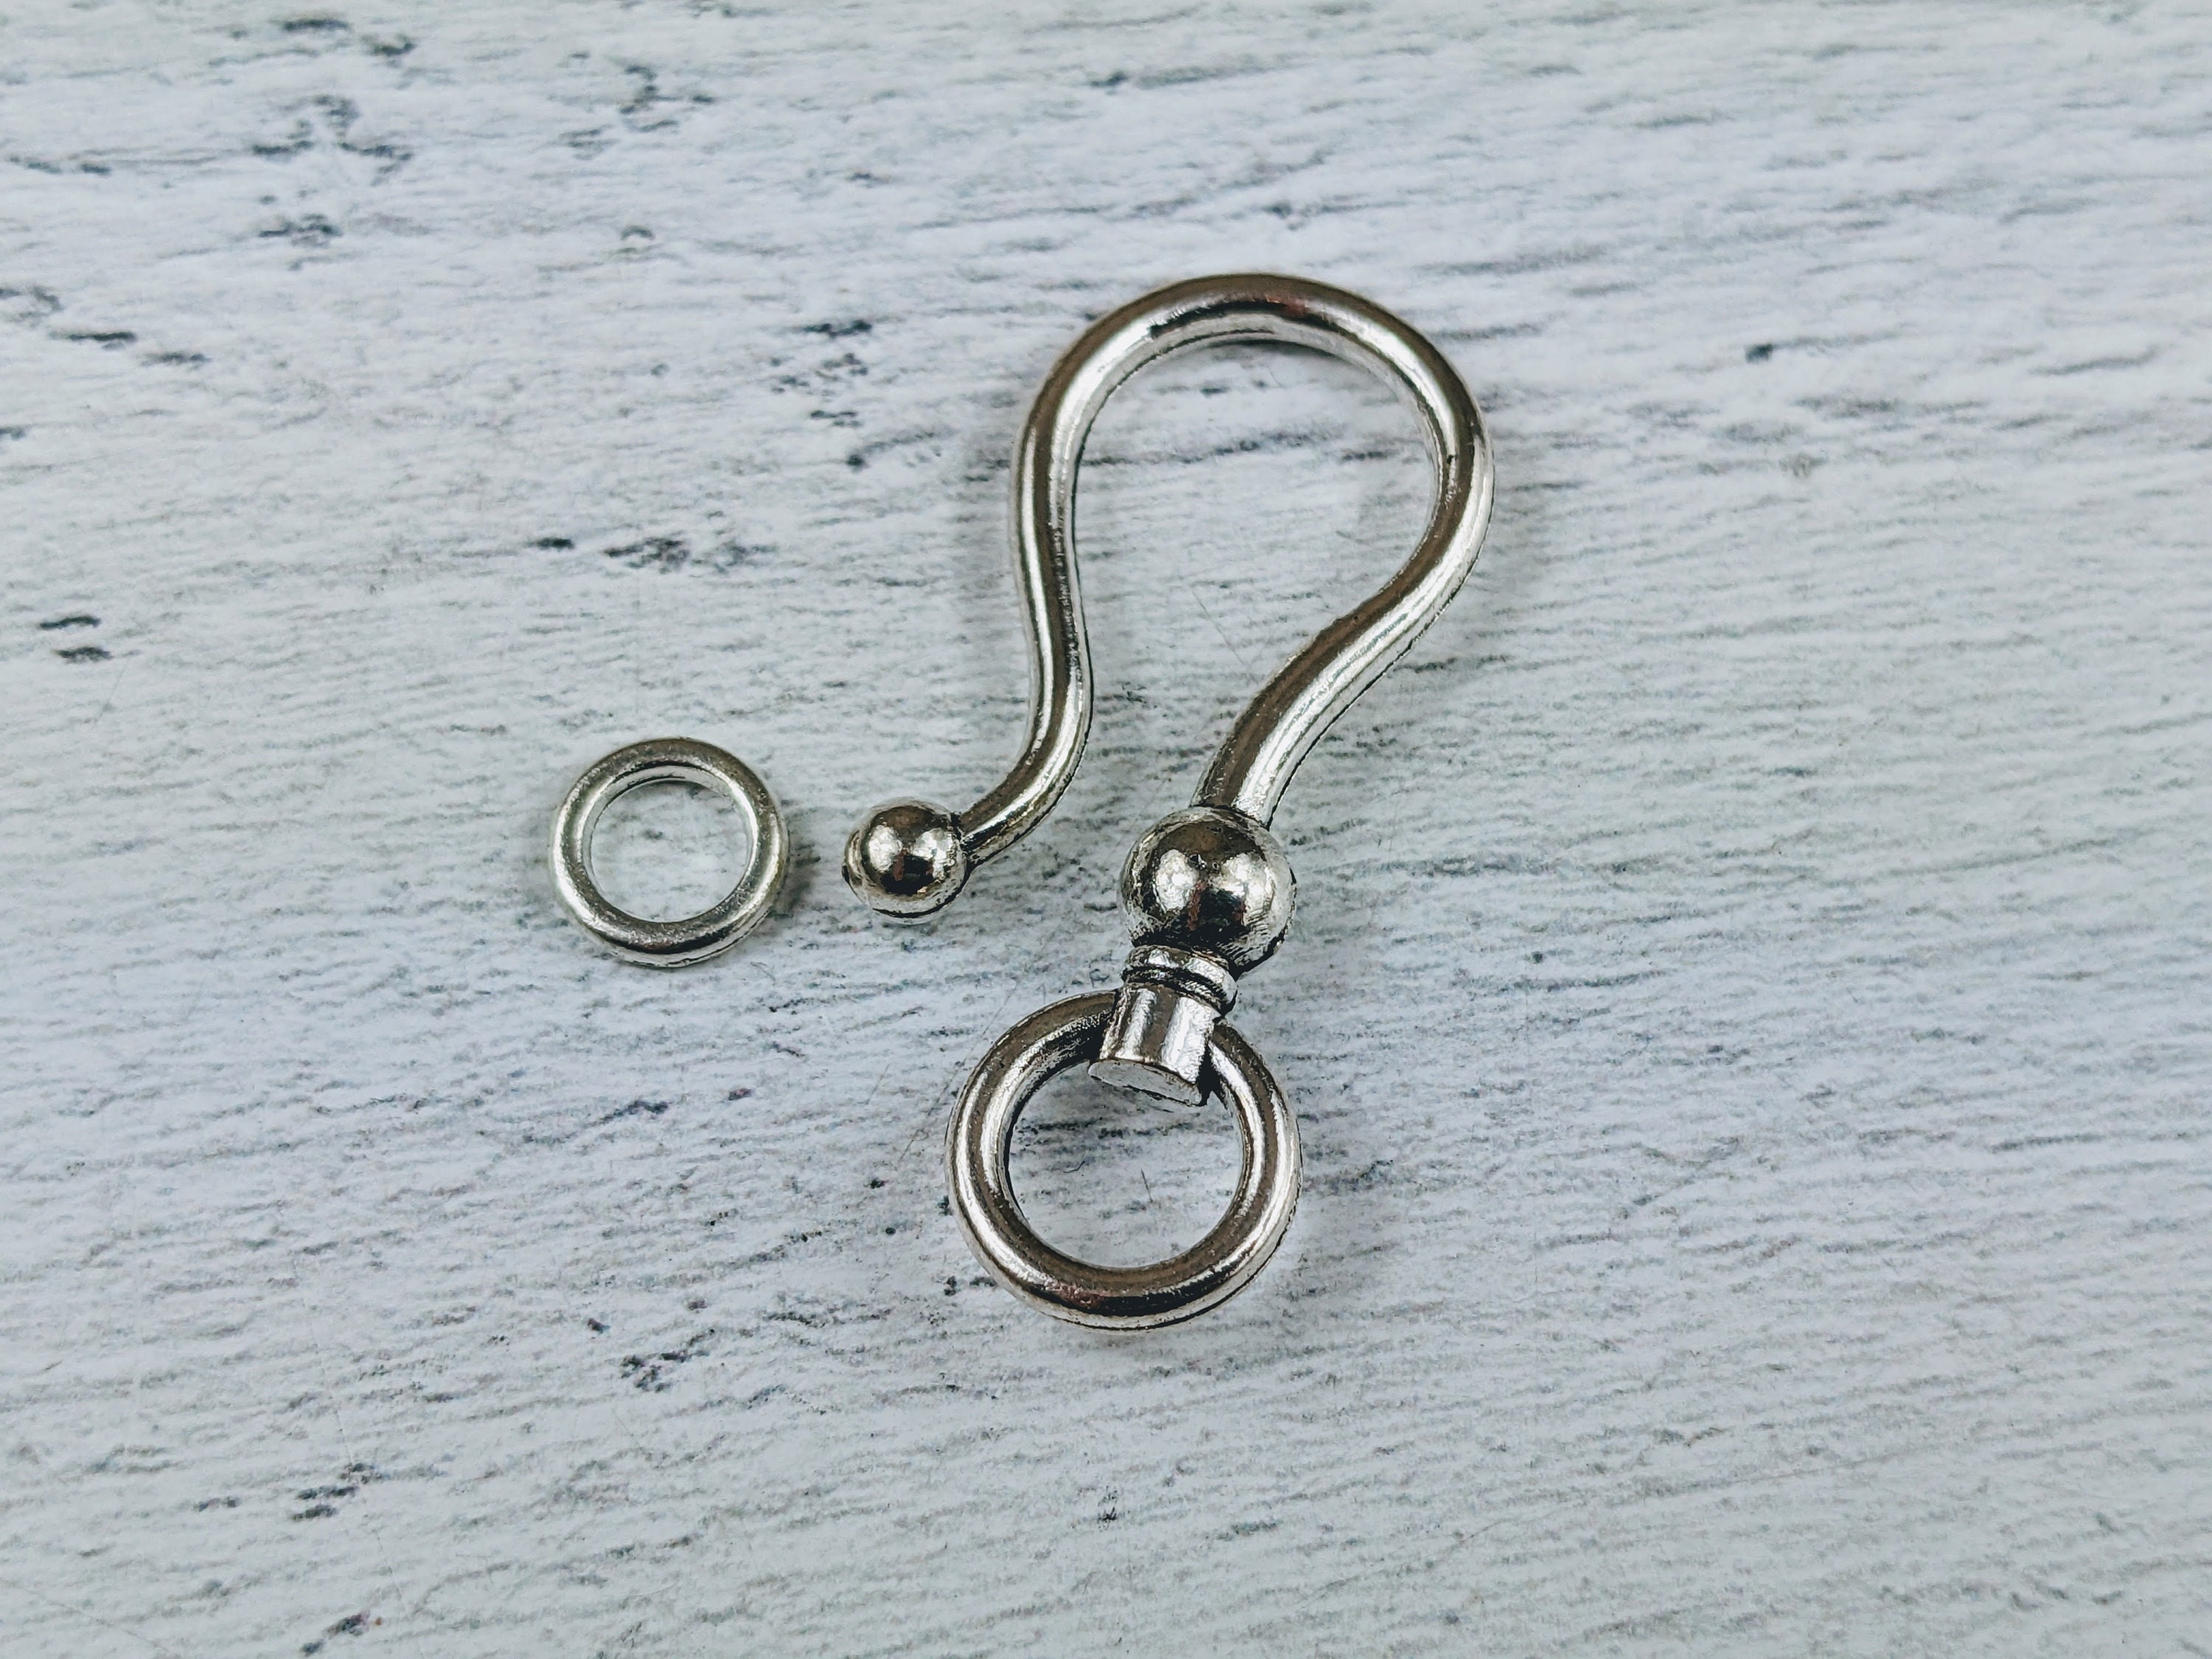 S-hook Clasps With Double Sided Rope Wrap Design, Twelve 12 Gunmetal  Finished S-hook Clasp, Jewelry Supplies, Necklace Supplies, Item373m 